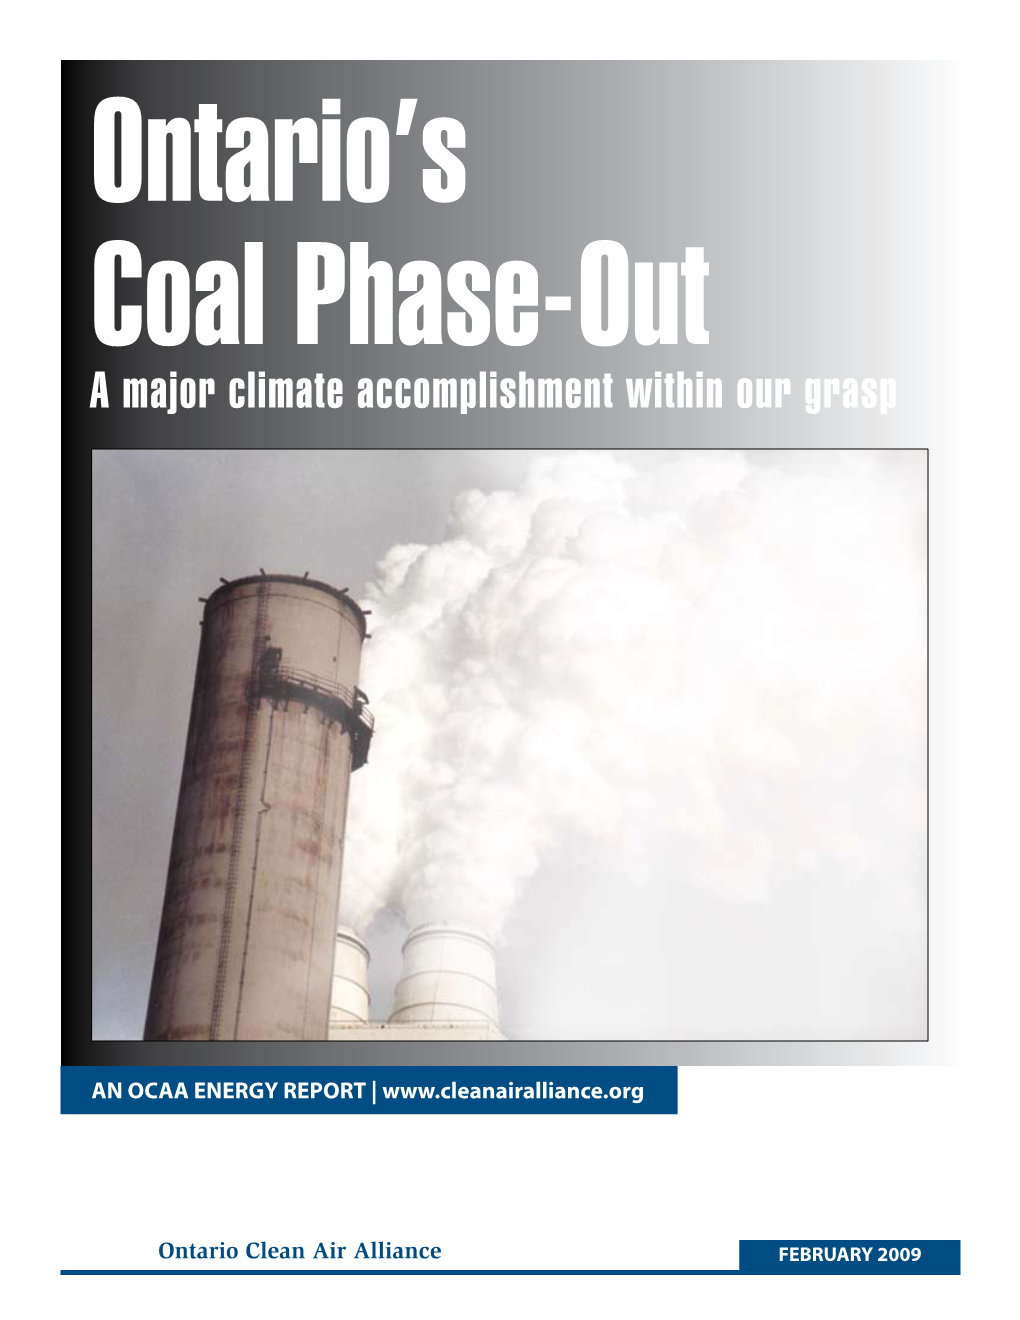 Ontario's Coal Phase-Out: a Major Climate Accomplishment Within Our Grasp